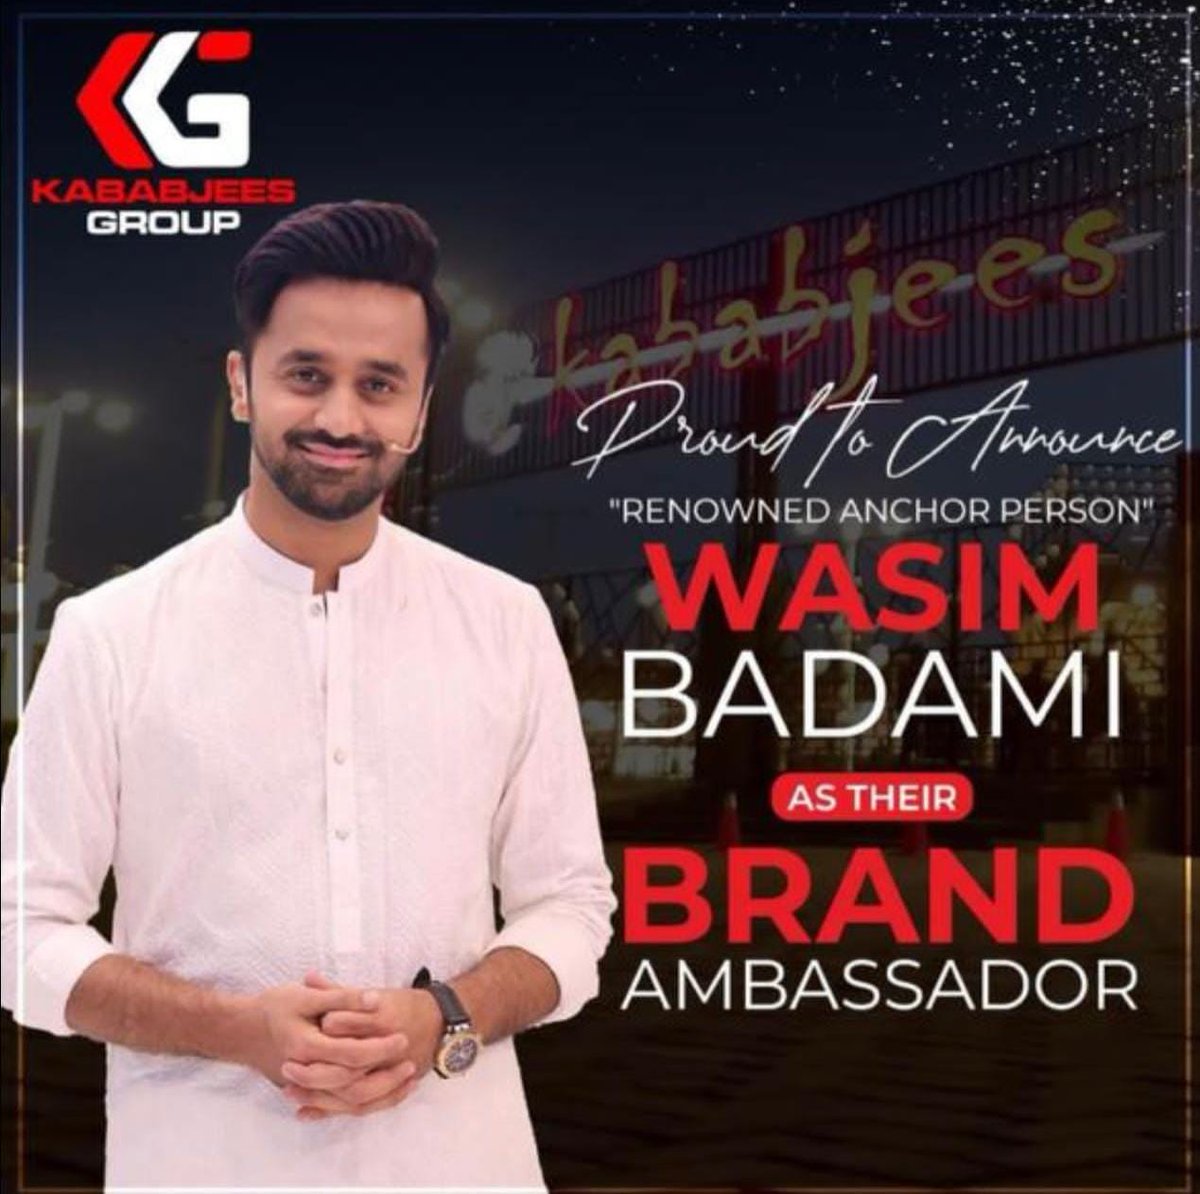 Famous restaurant chain Kababjees signed Waseem Badami as their brand ambassador.